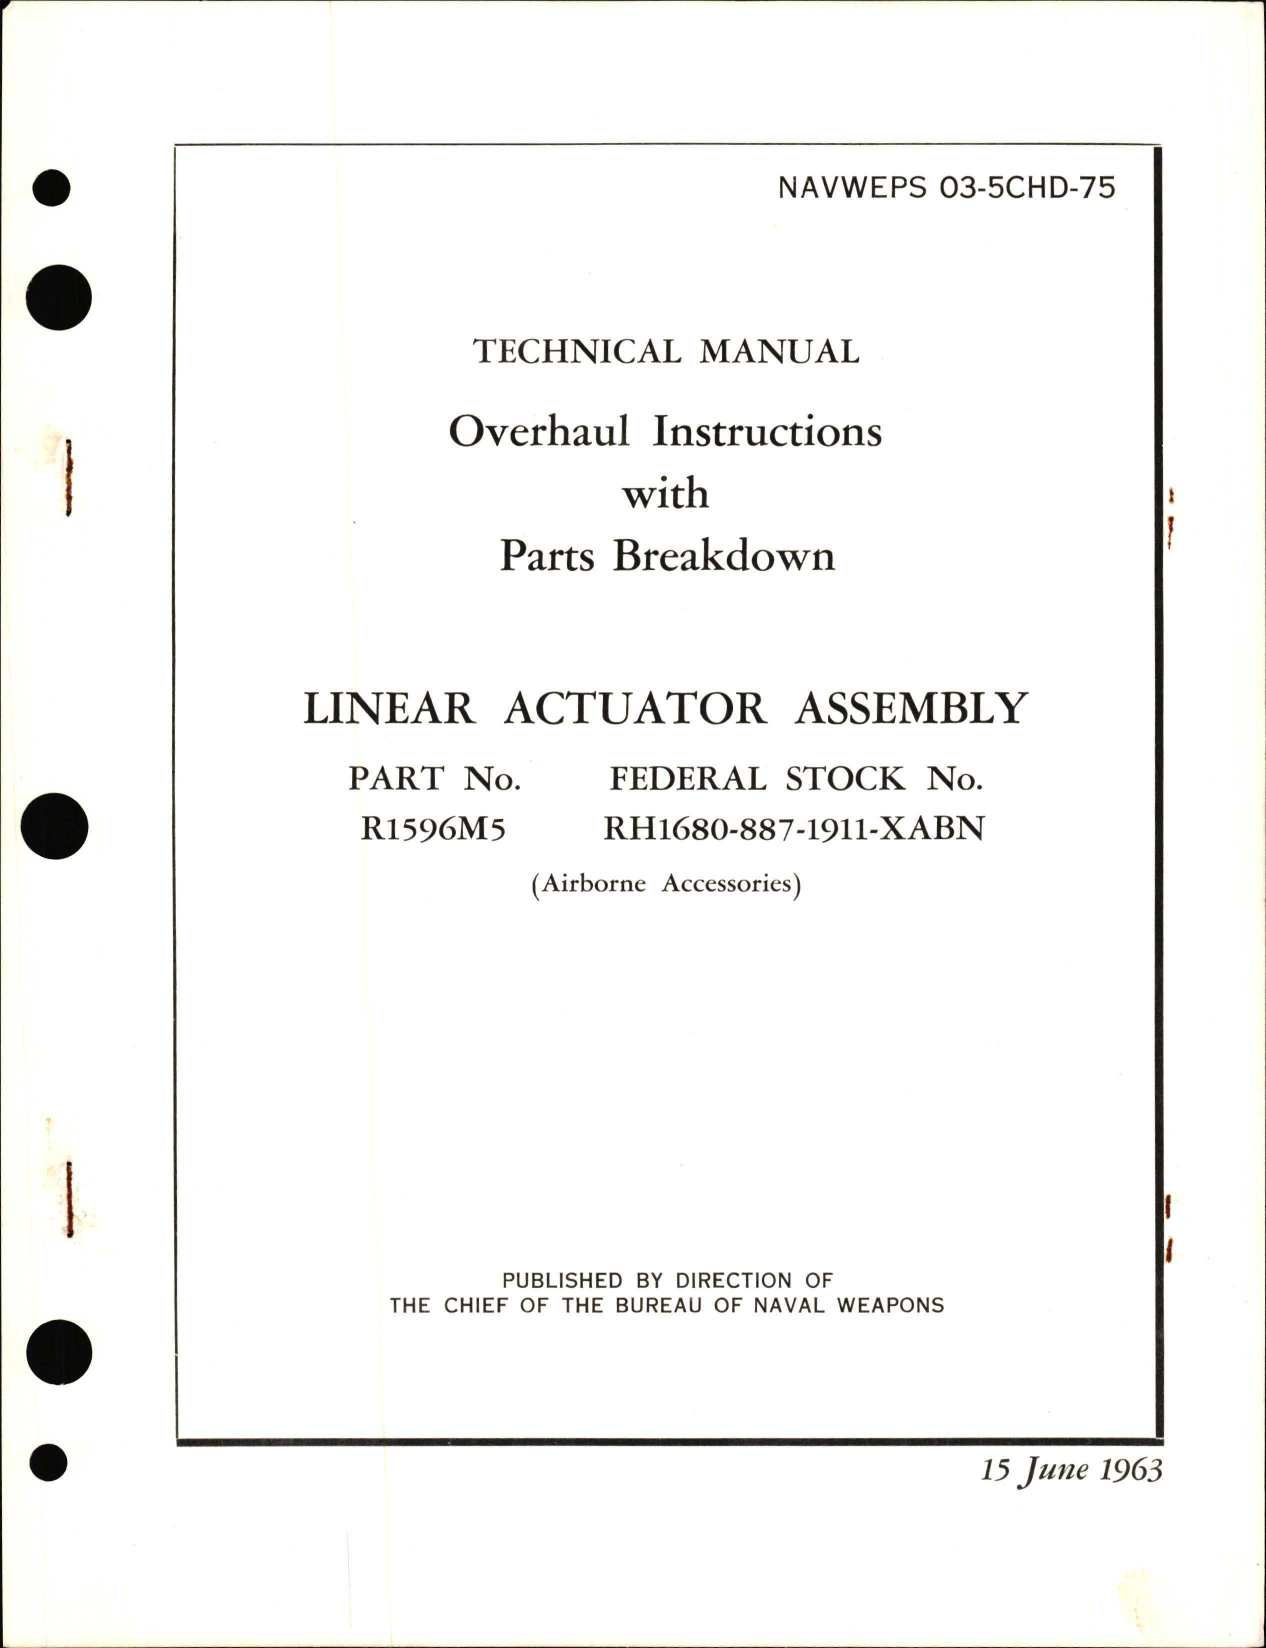 Sample page 1 from AirCorps Library document: Overhaul Instructions with Parts Breakdown for Linear Actuator Assembly R1596M5 